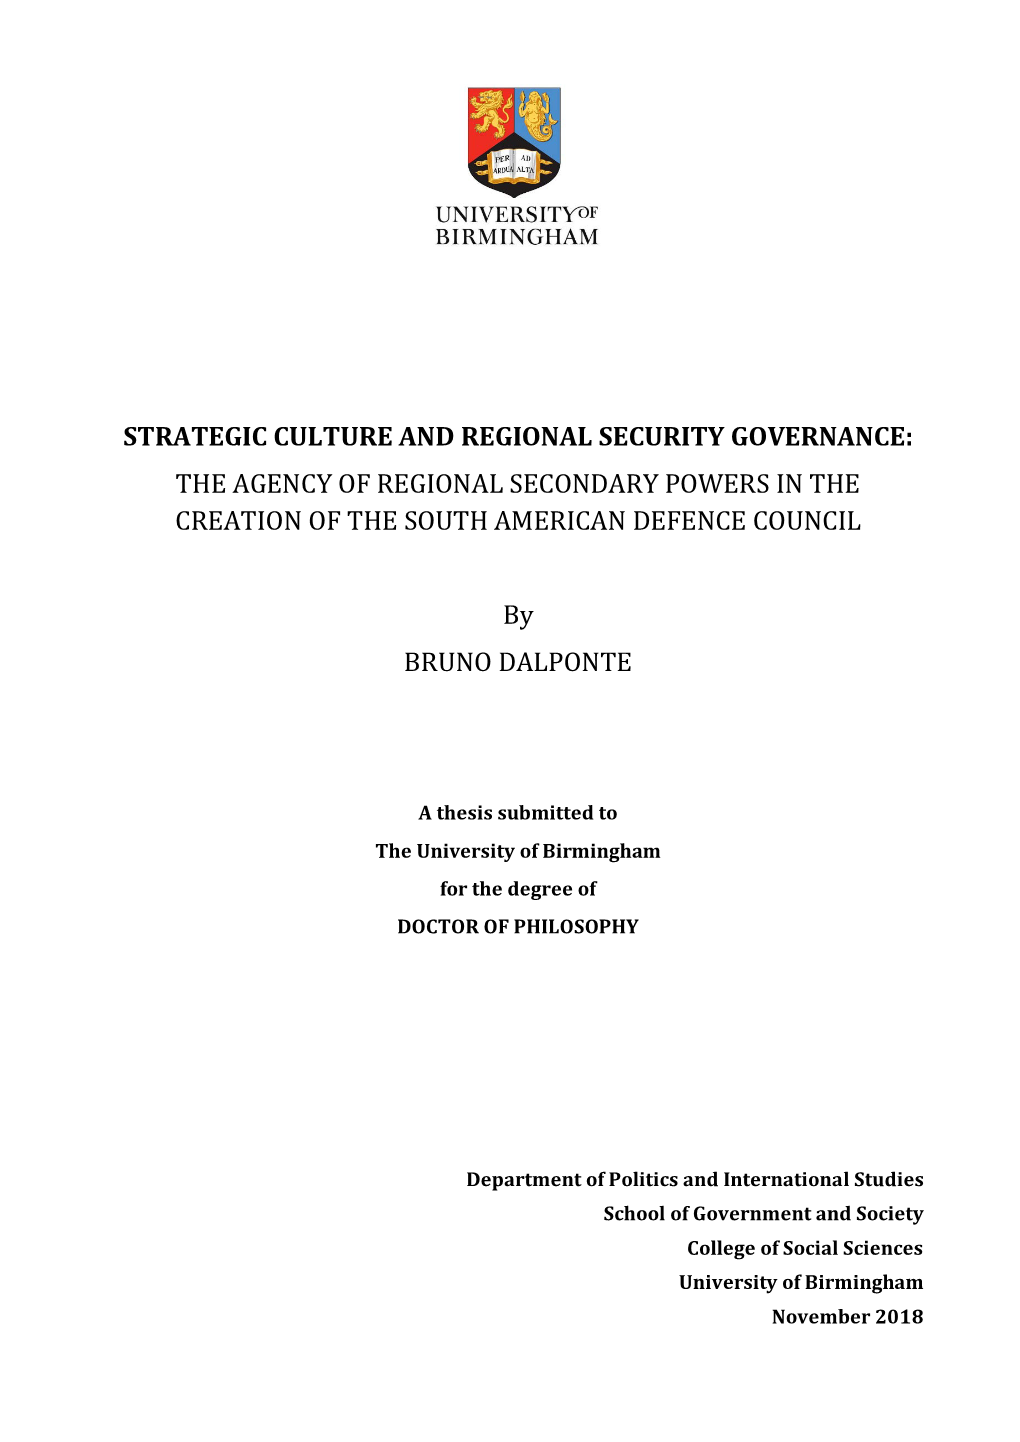 Strategic Culture and Regional Security Governance: the Agency of Regional Secondary Powers in the Creation of the South American Defence Council